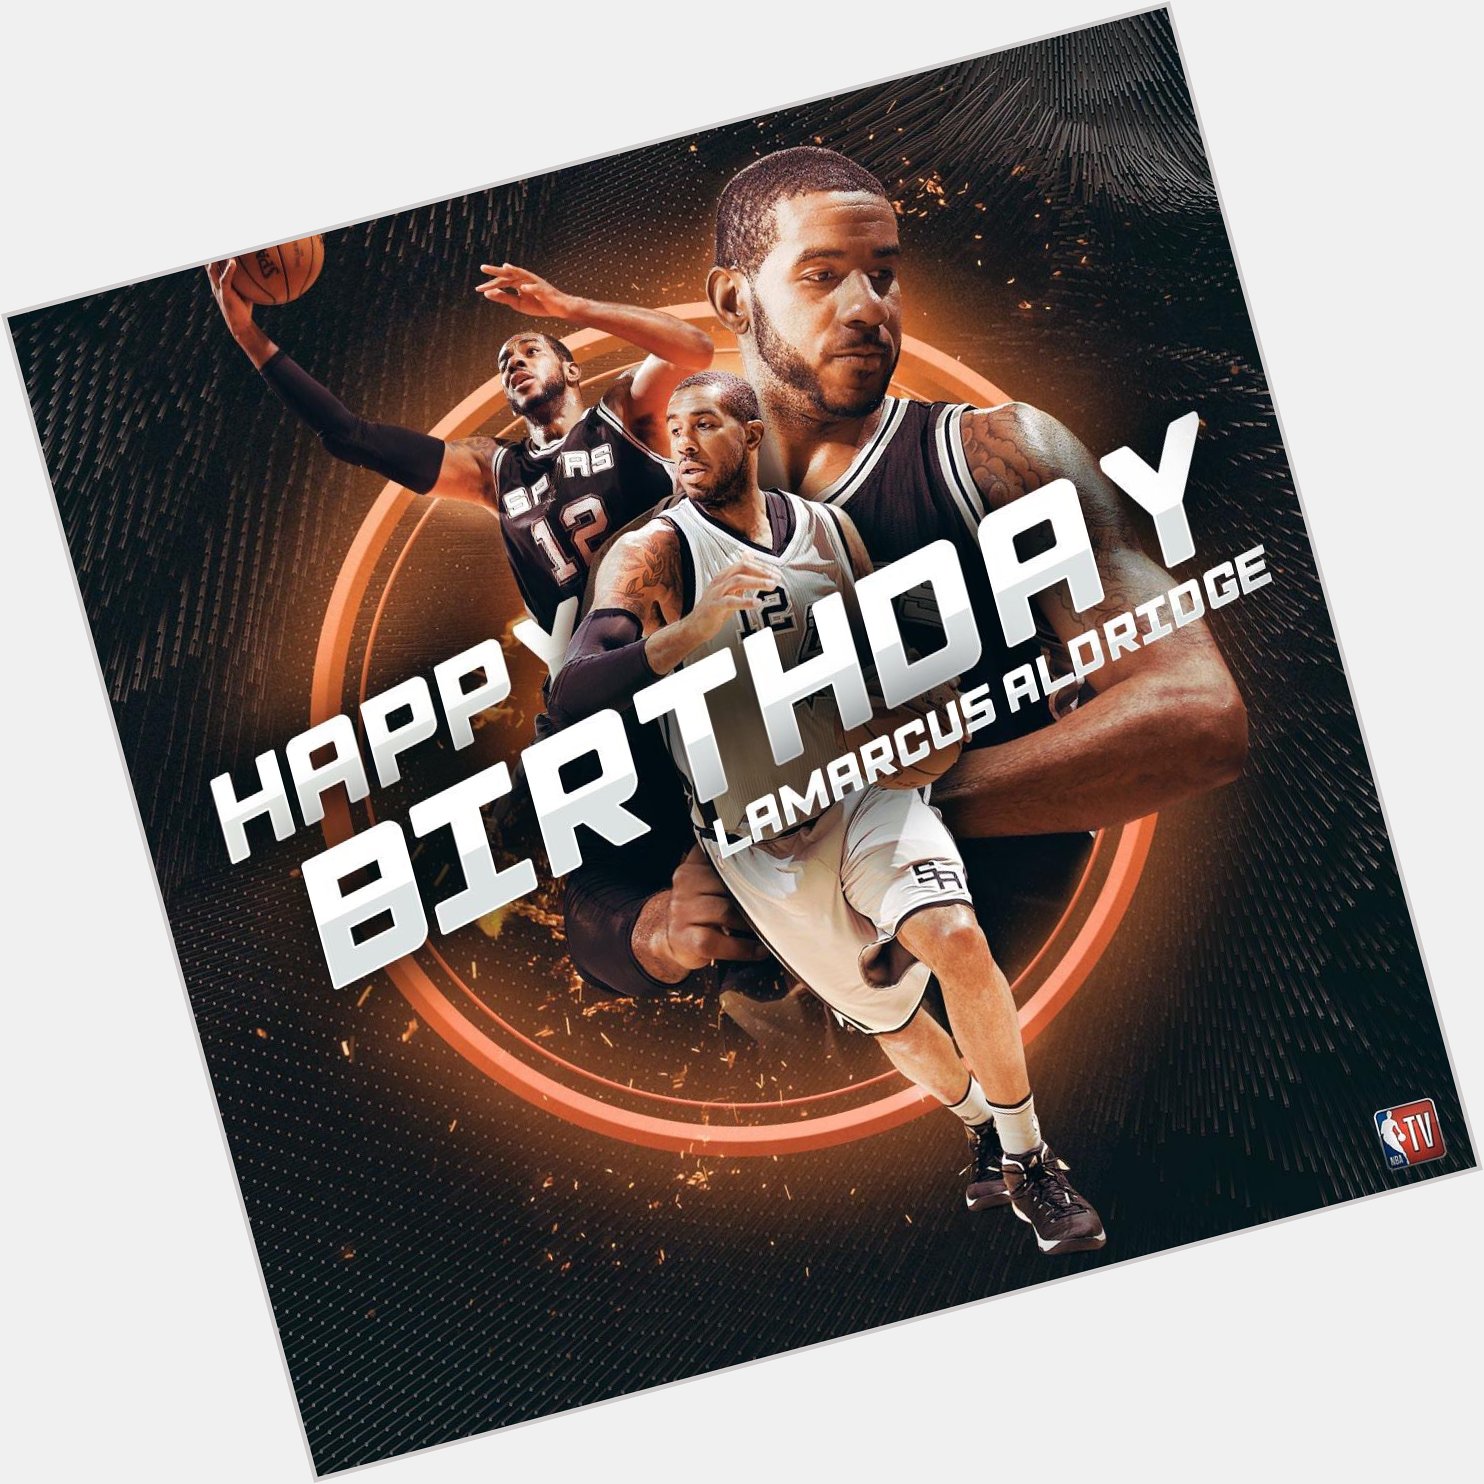 Happy Birthday LaMarcus Aldridge! Expecting big things from you this year!  